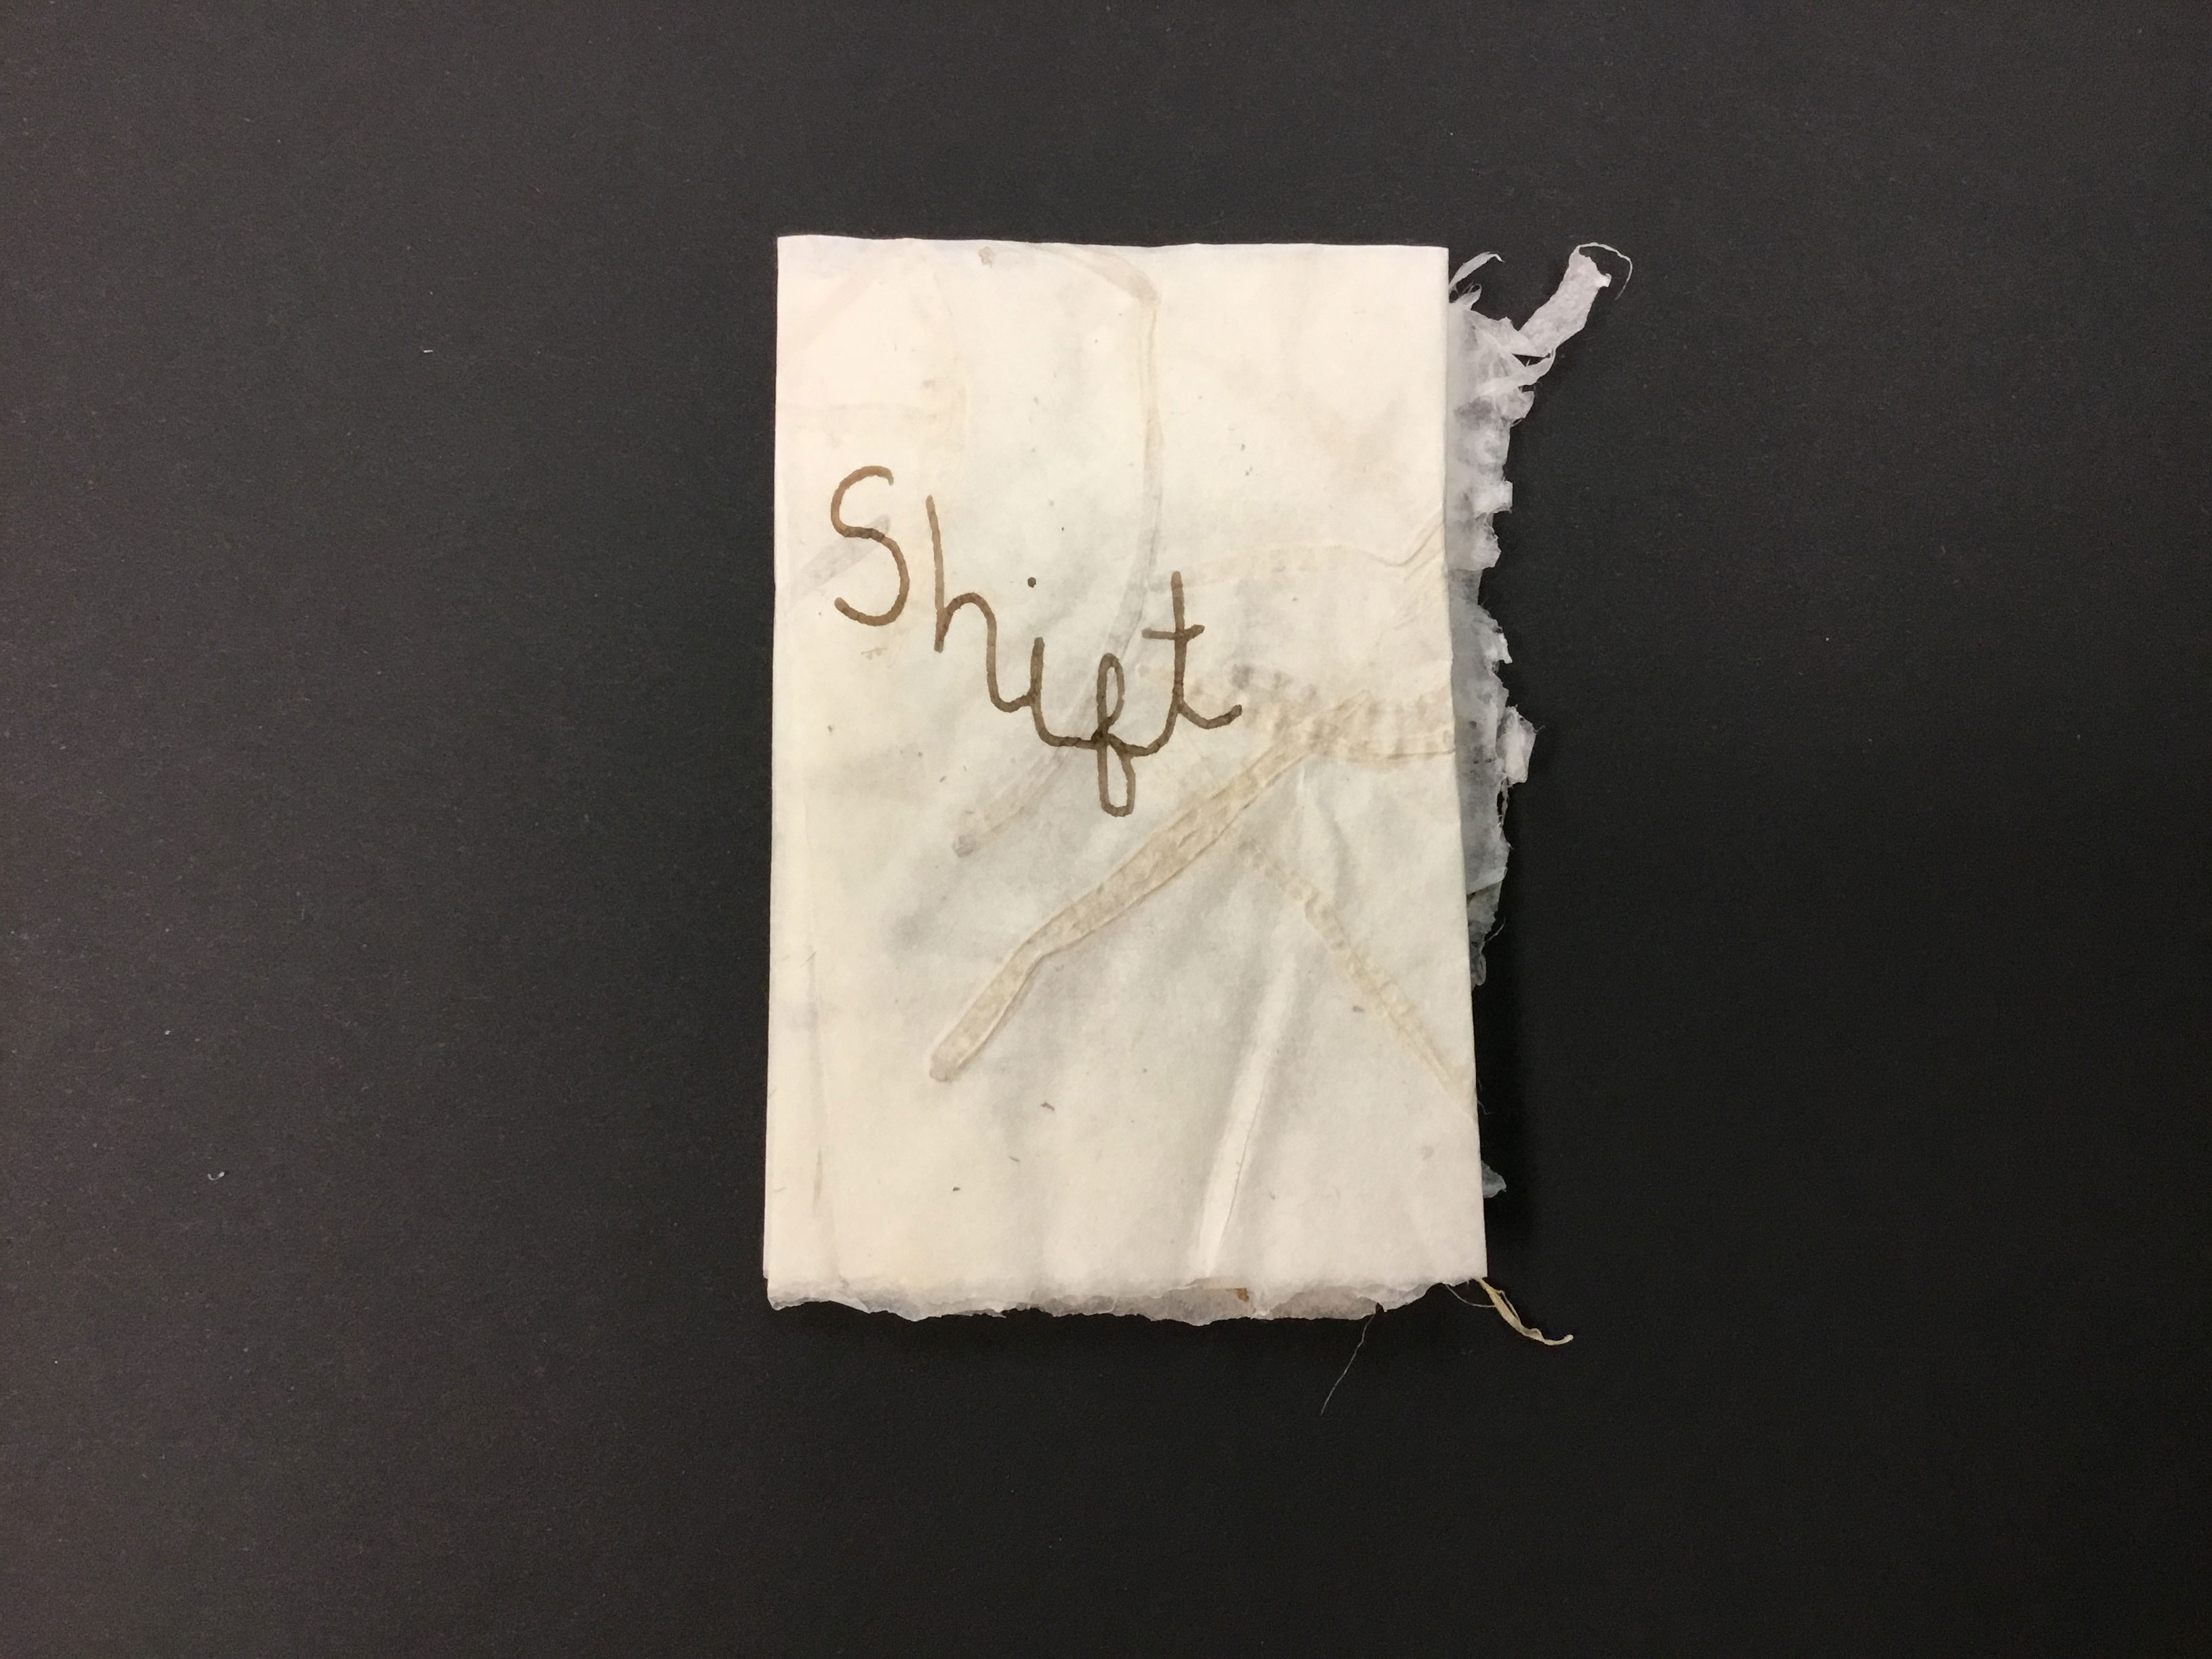 This piece is a small, handmade paper booklet with the word “Shift” written in cursive lettering on the front. This piece is made from abaca with Roja kale and seed pod inclusions, and each page has different linear sketches painted in brown ink.